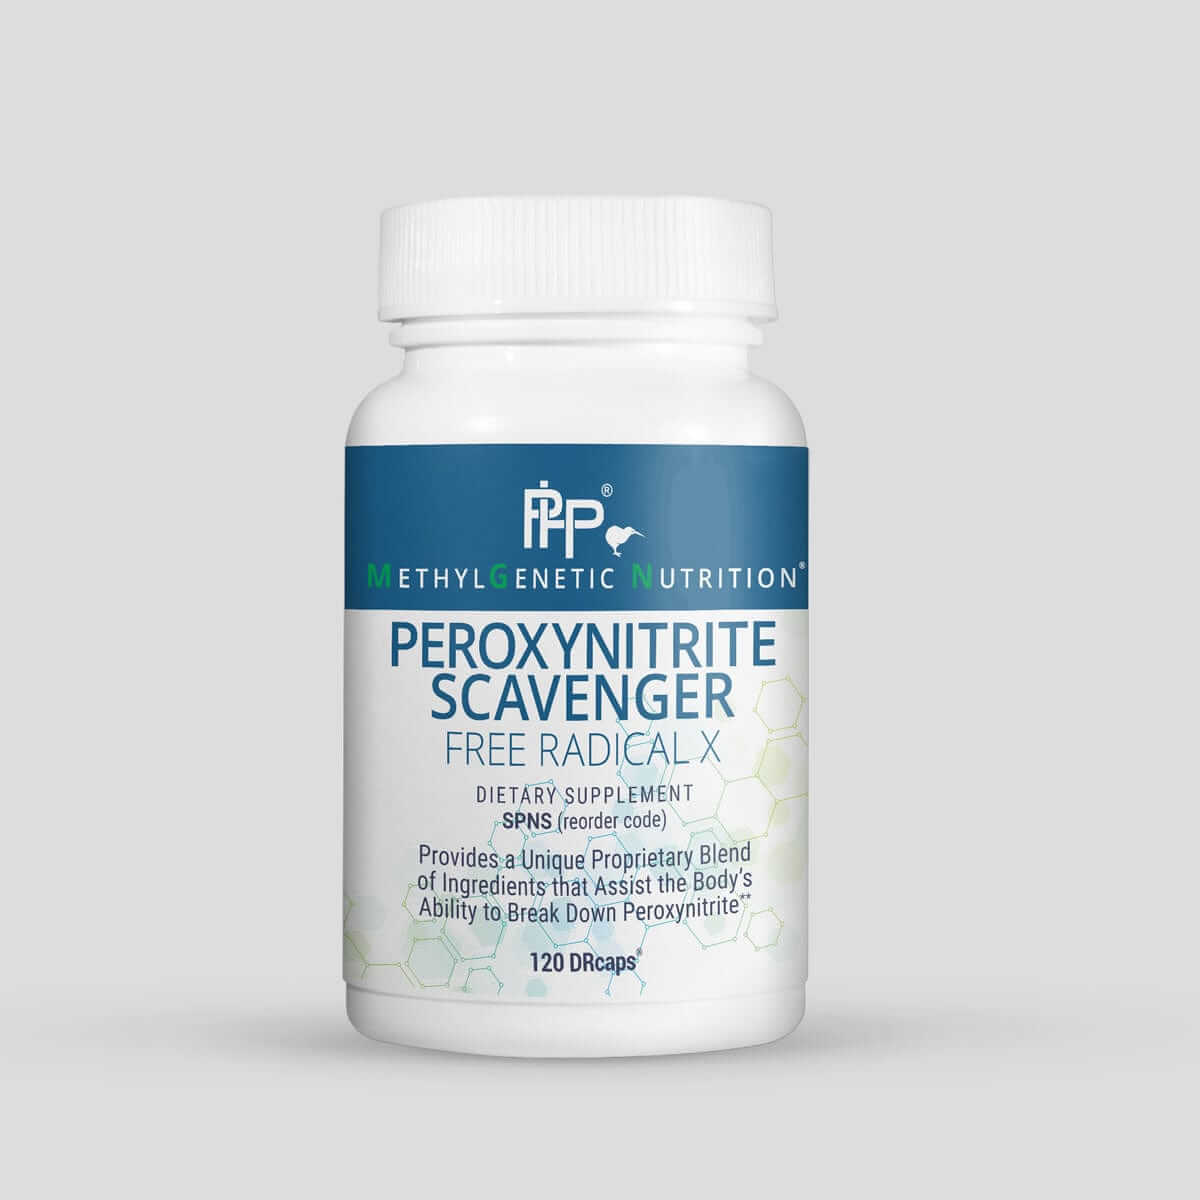 Peroxynitrite Scavenger (Free Radical X) * Prof Health Products Supplement - Conners Clinic